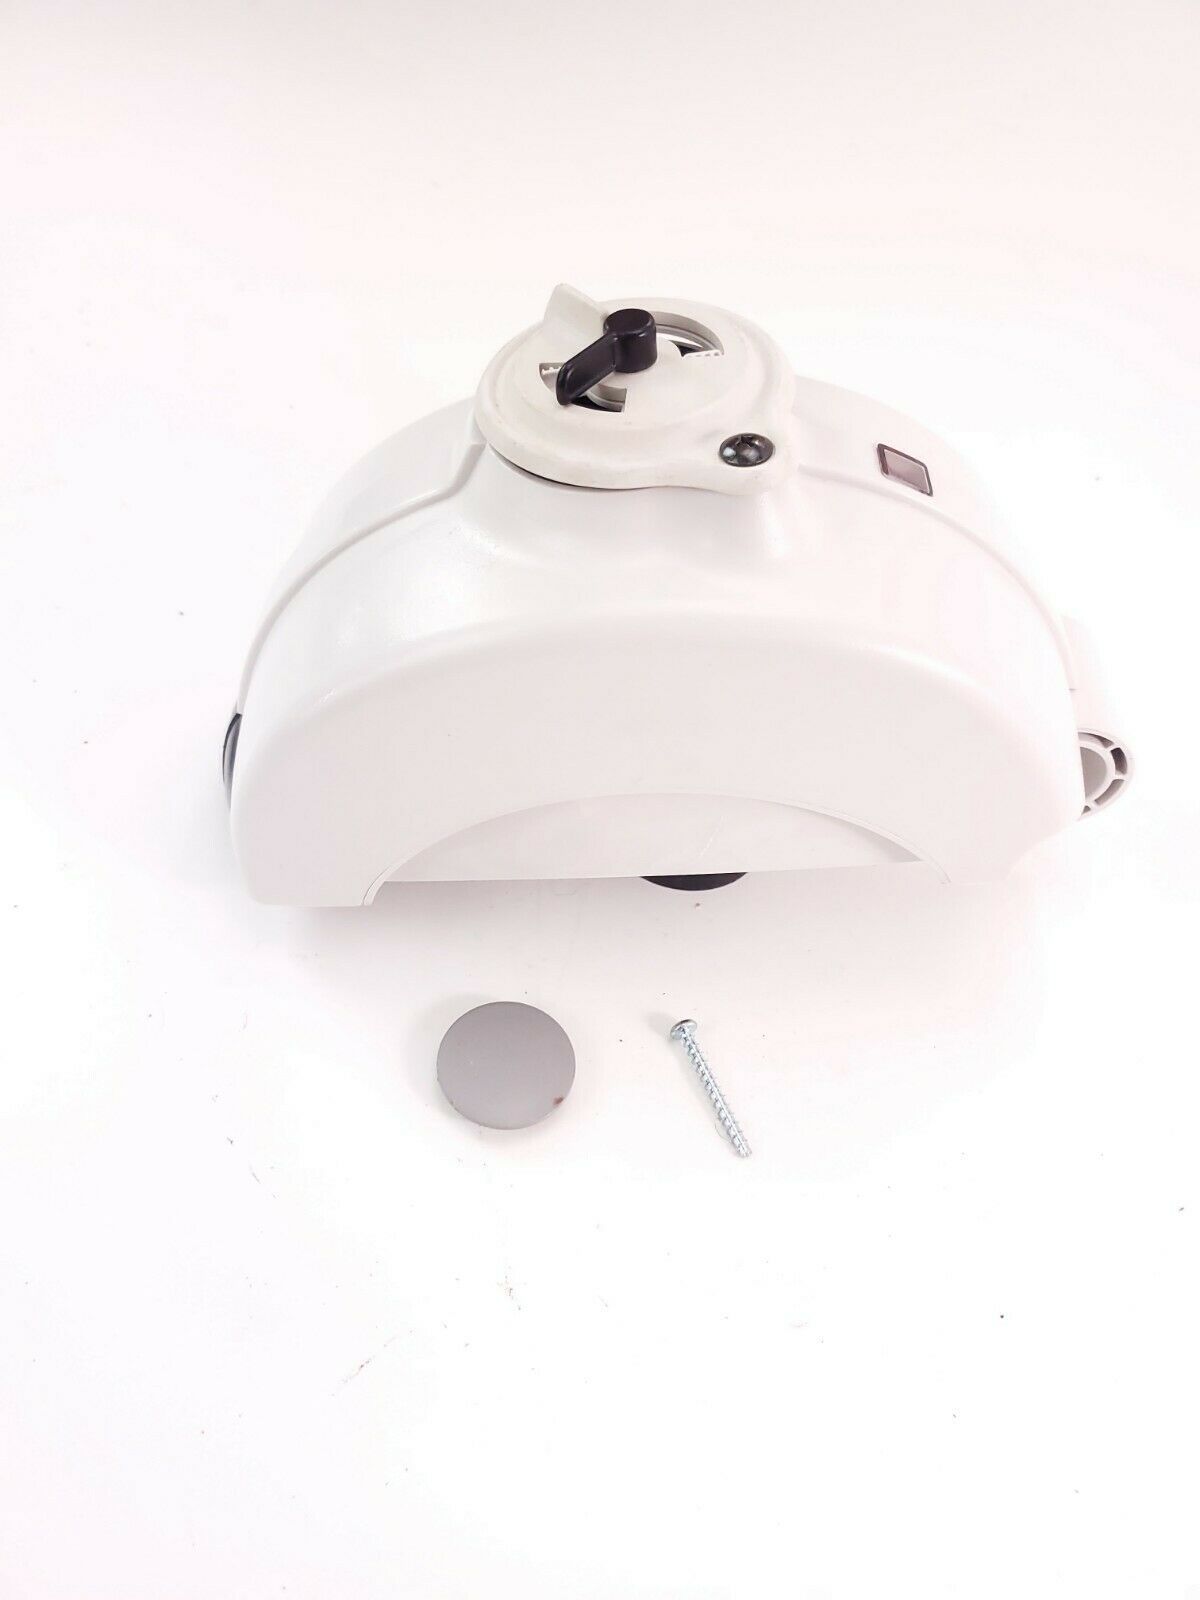 Primary image for Ultra lux ultralux By Electrolux Vacuum Part Model U160A, White Bag Lid Only